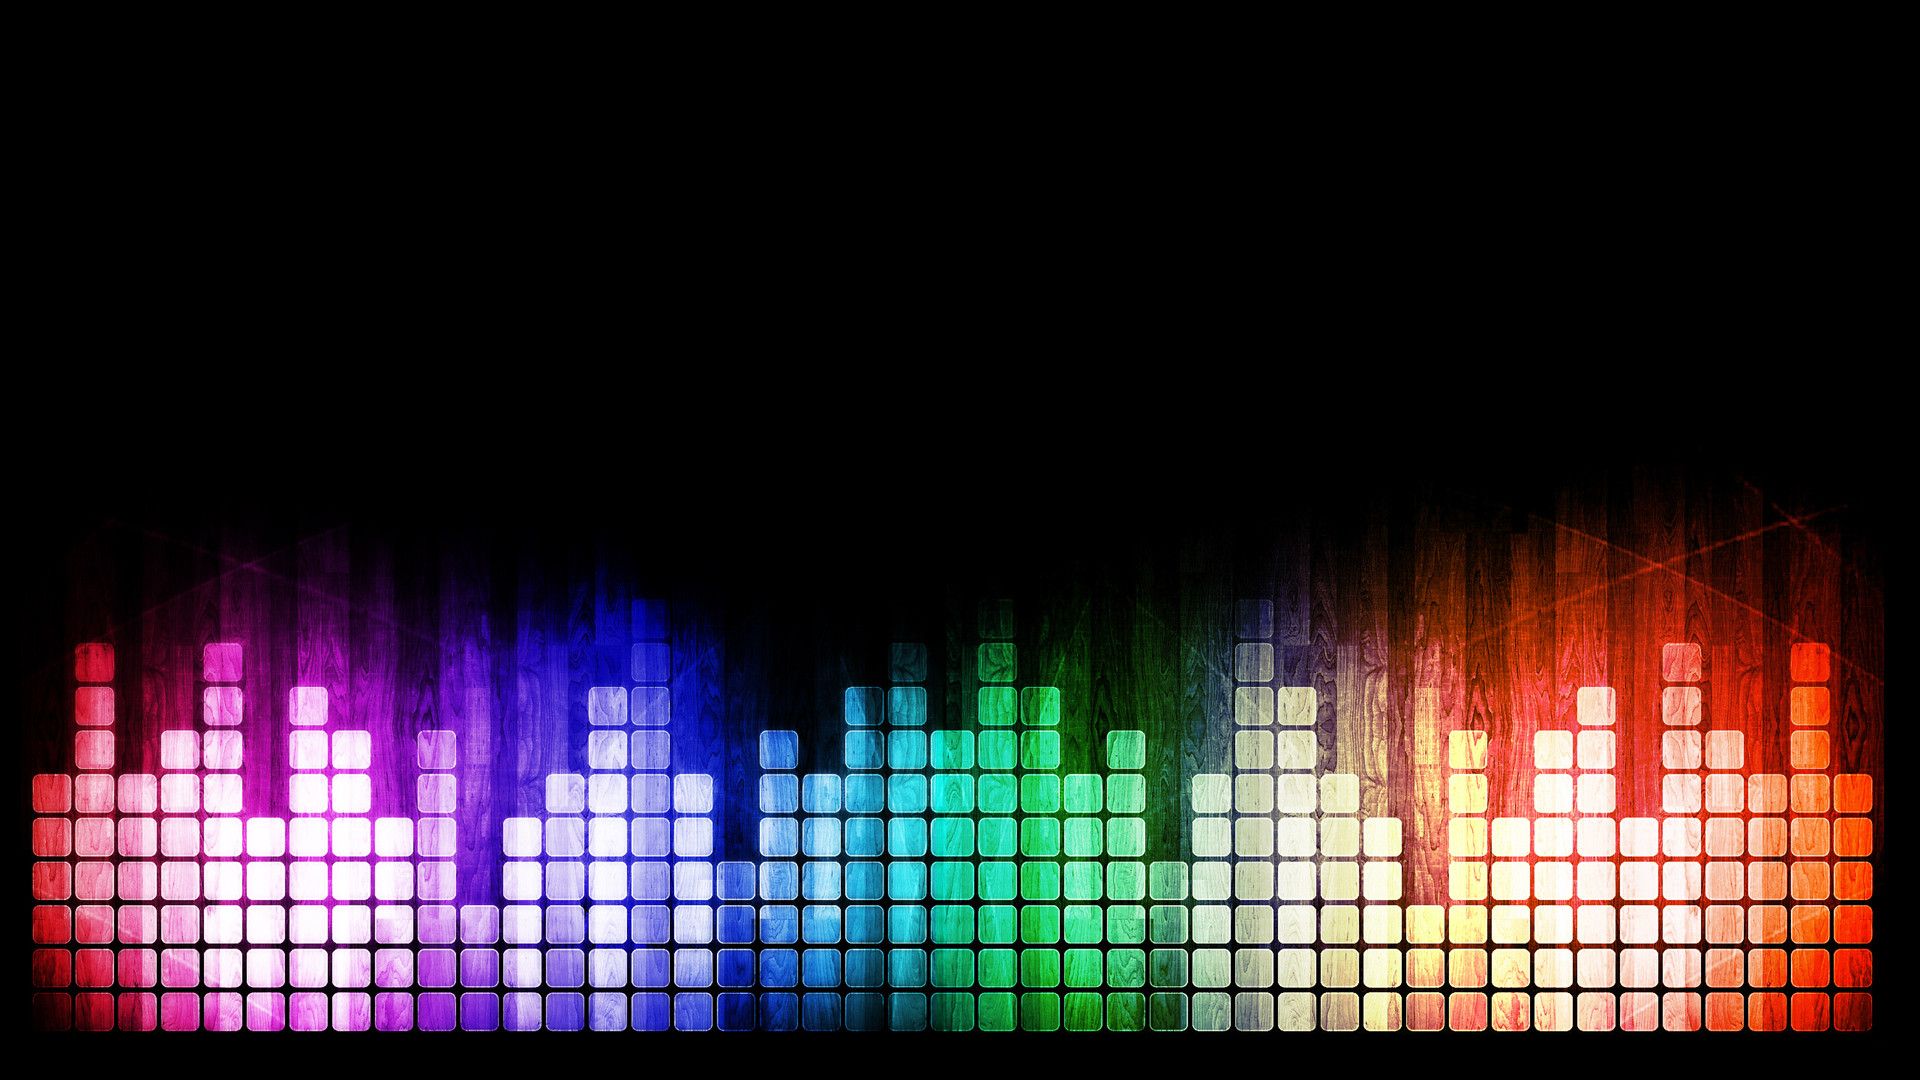 Awesome music wallpapers